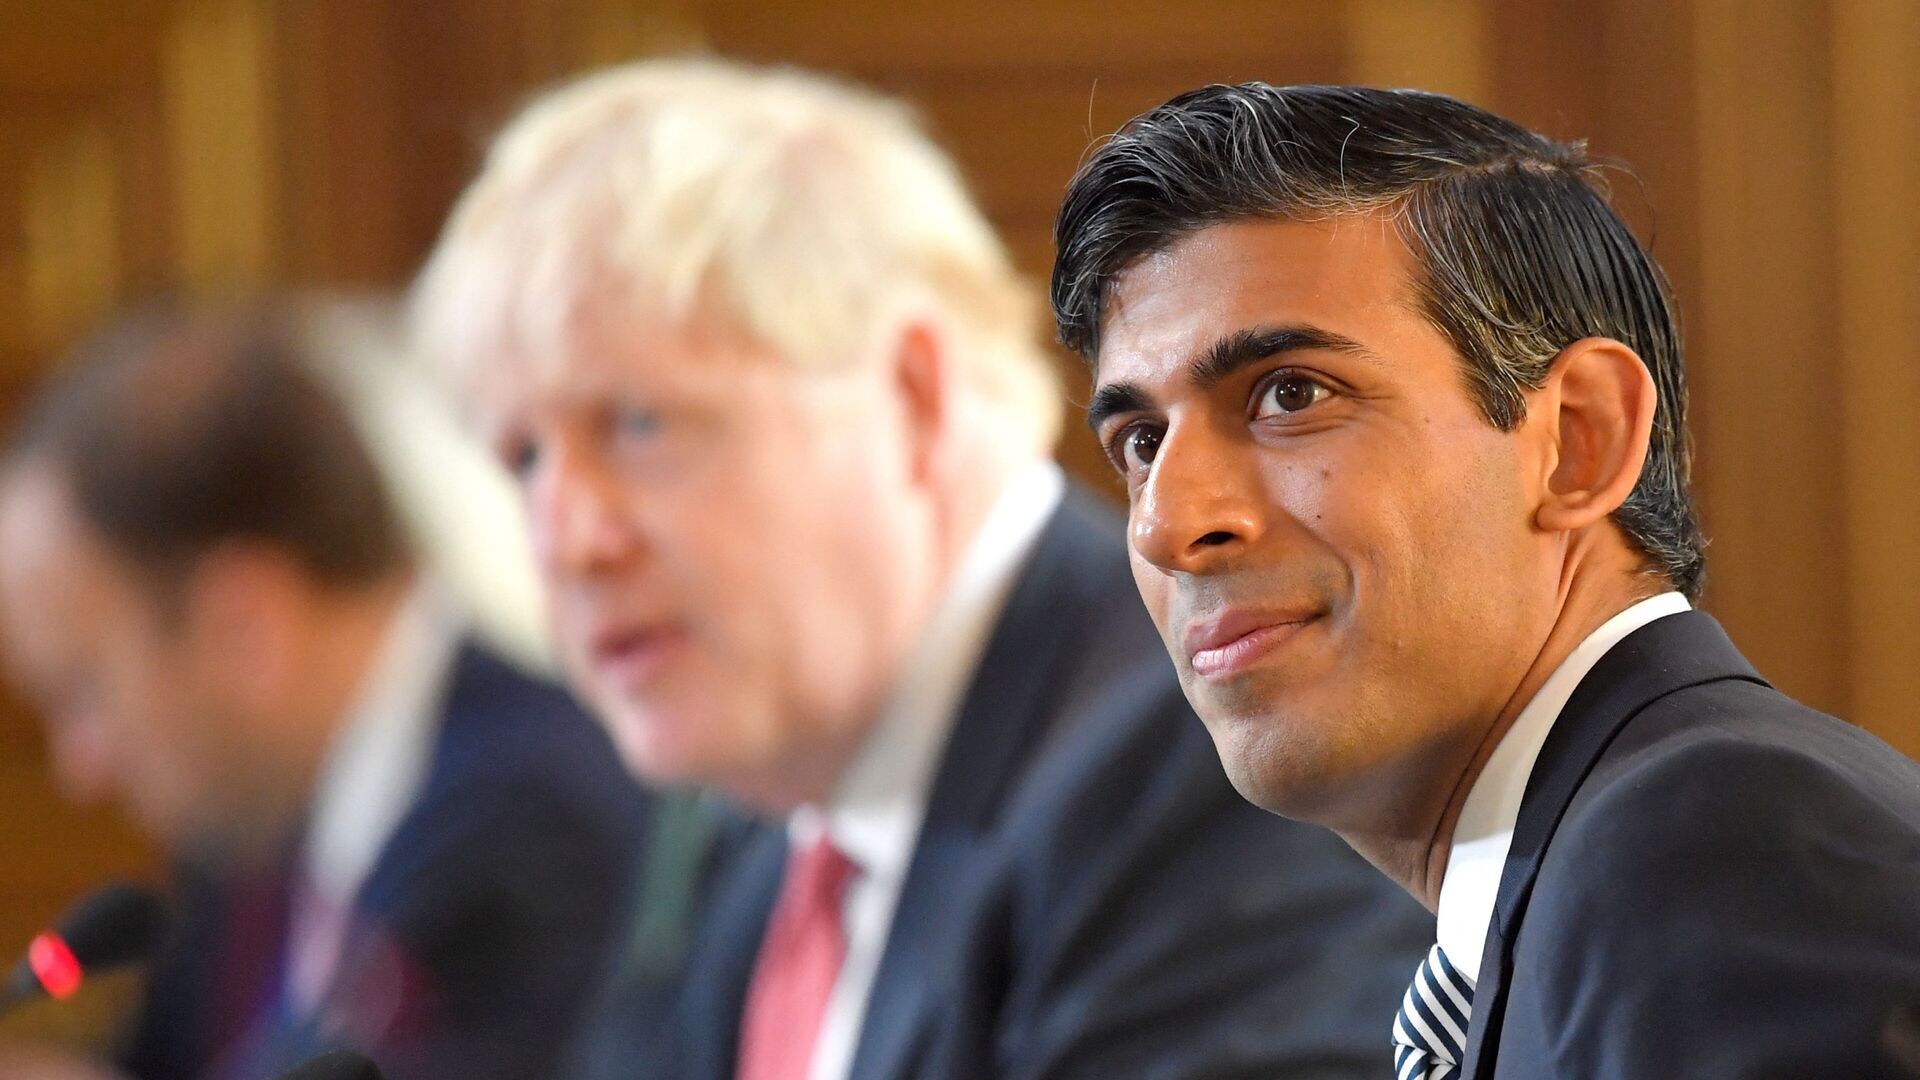 Britain's Chancellor of the Exchequer Rishi Sunak (R) sits beside Britain's Prime Minister Boris Johnson (C) at a Cabinet meeting of senior government ministers at the Foreign and Commonwealth Office (FCO) in London on September 1, 2020.  - Sputnik International, 1920, 15.09.2021